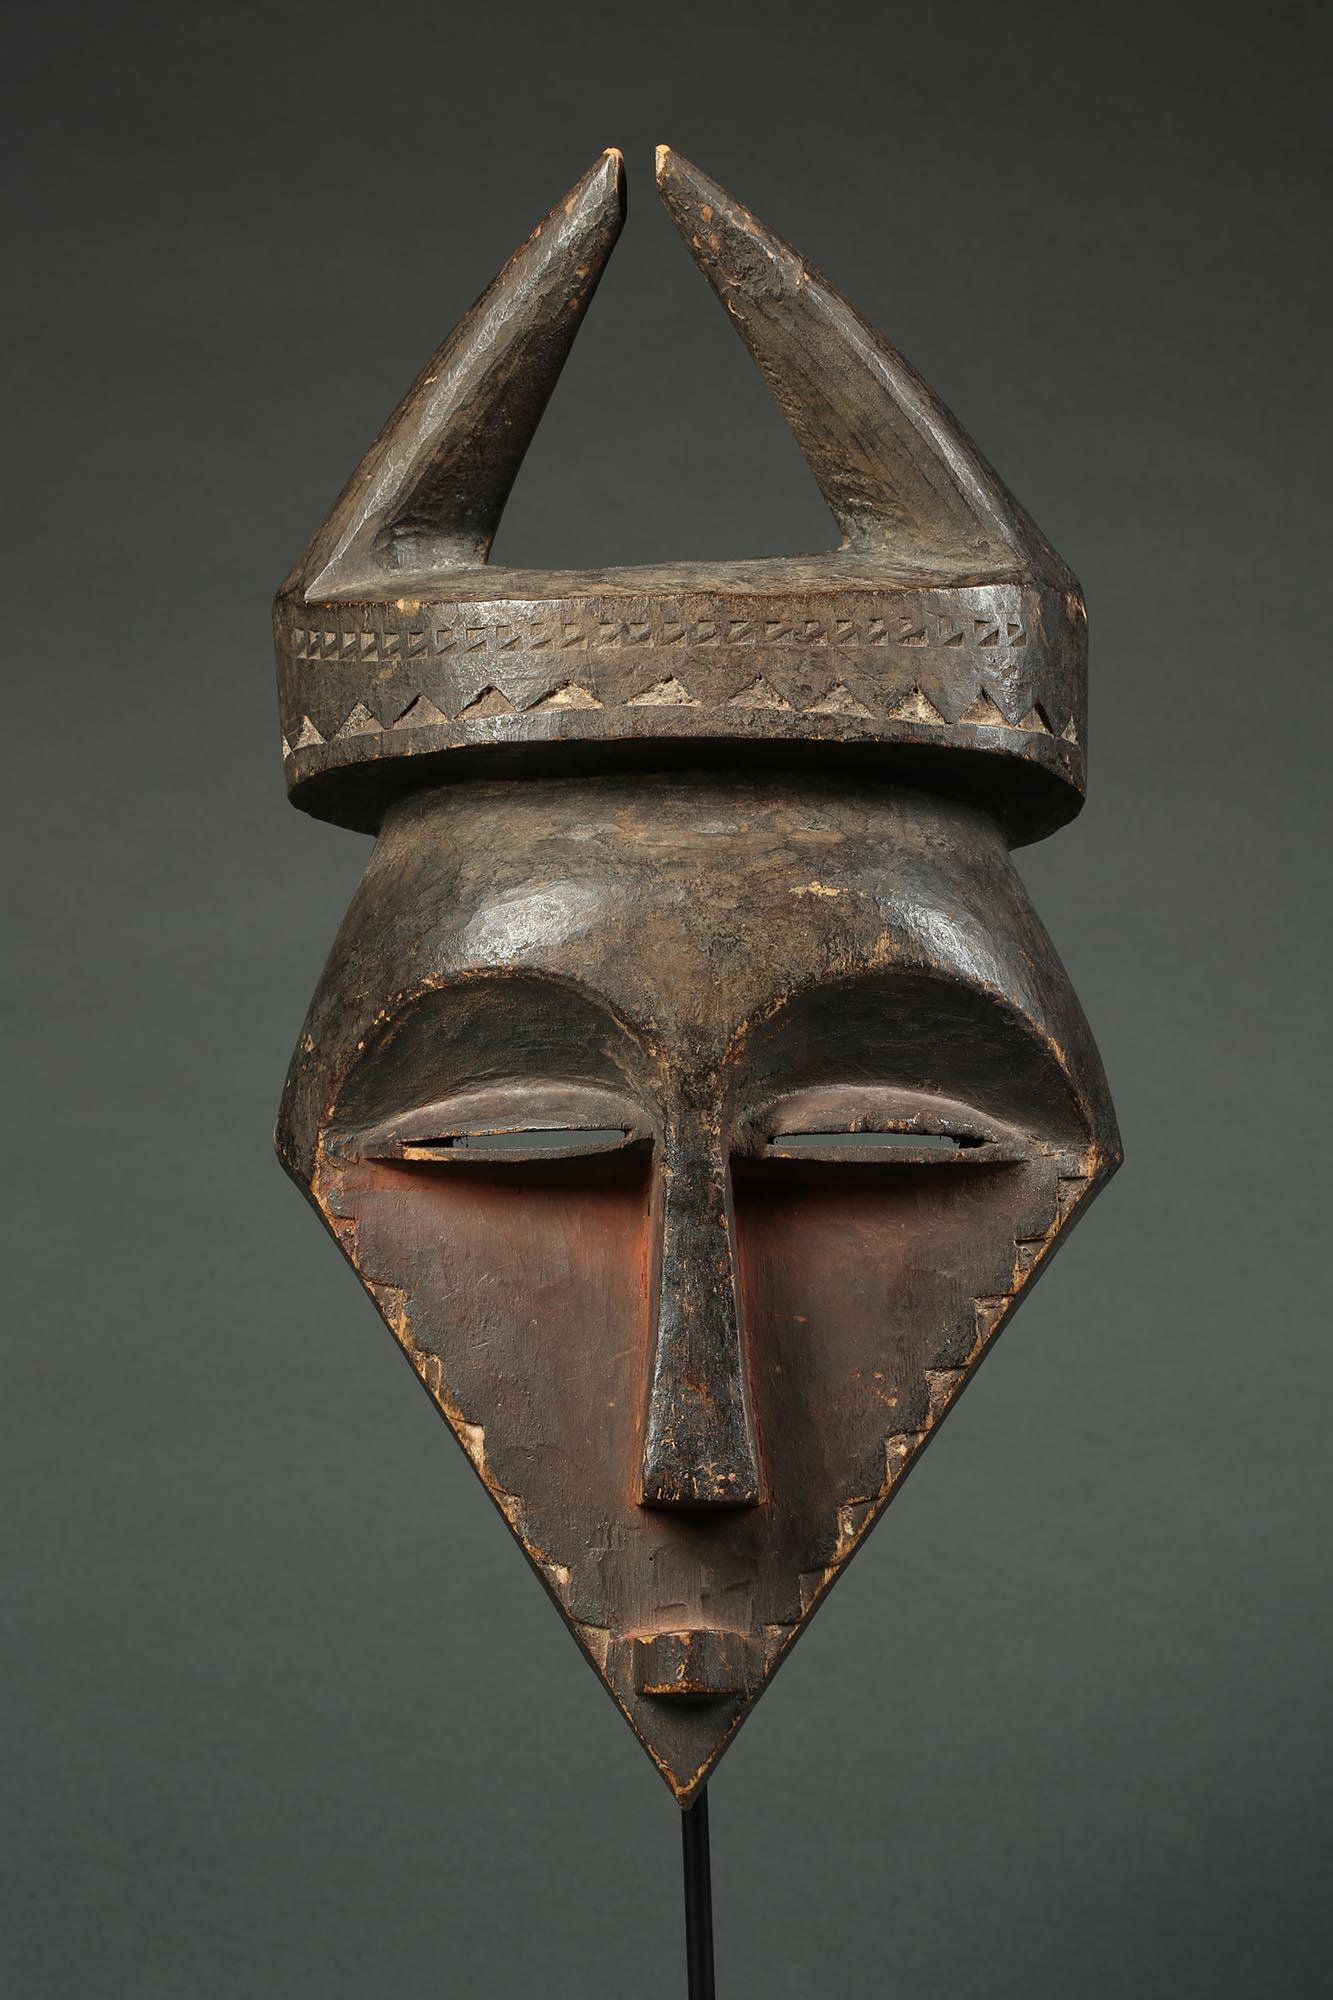 20th Century Eastern Pende Geometric Tribal Mask with Horns Ex Museum Congo, Africa